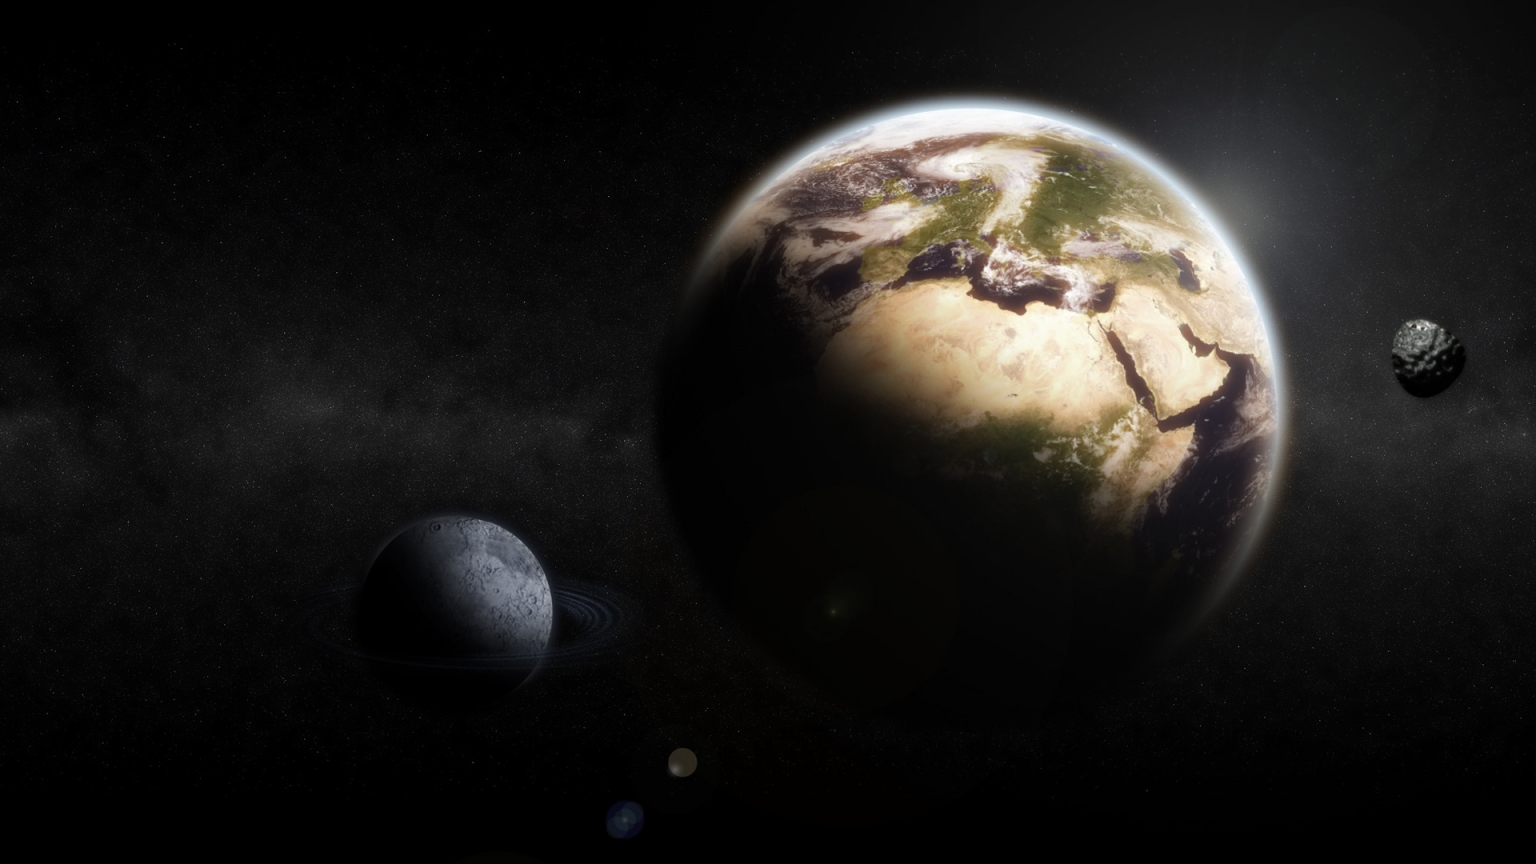 Earth & Moon for 1536 x 864 HDTV resolution